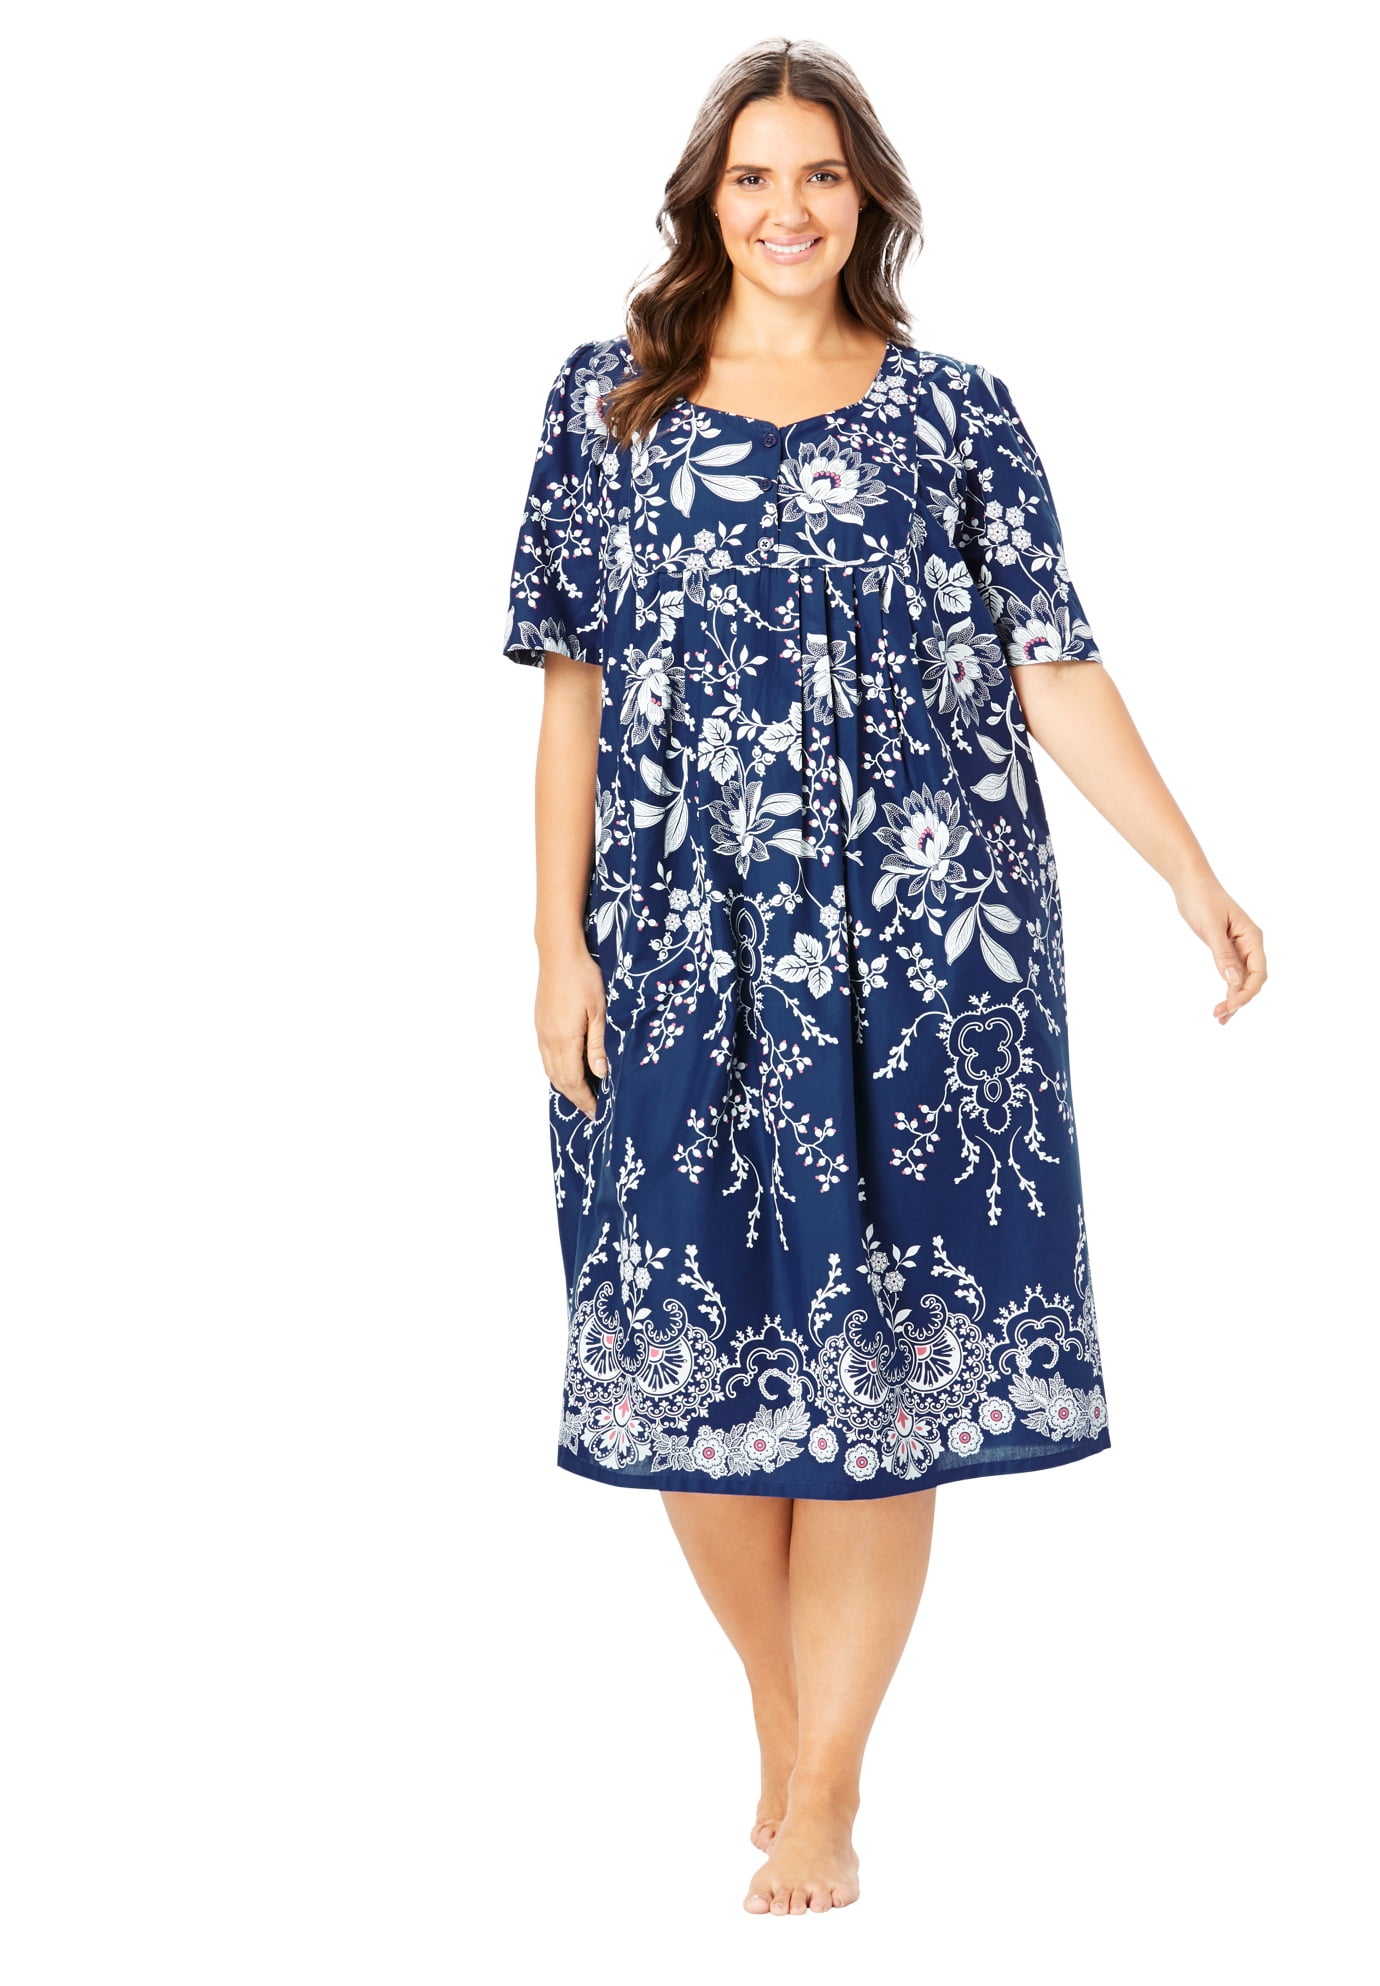 Only Necessities Womens Plus Size Mixed Print Short Dress Or Nightgown Dress Or Nightgown